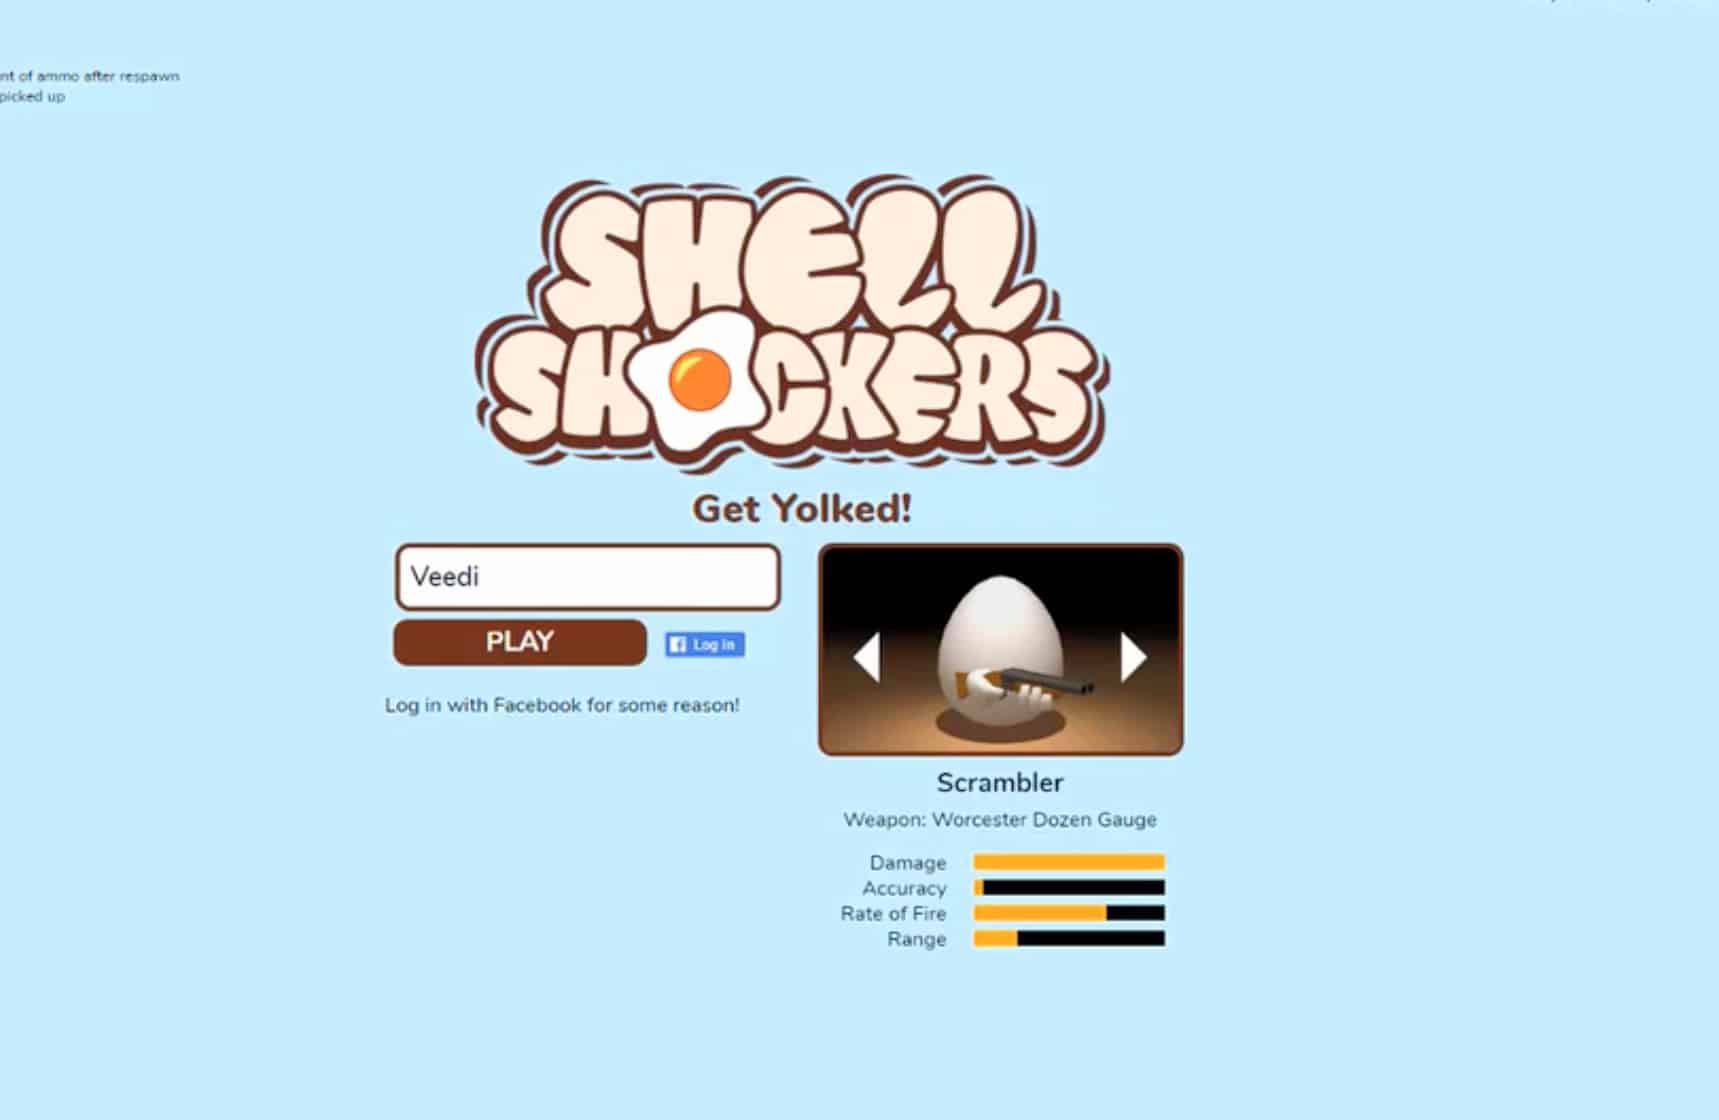 How to get *FREE* Items and Codes in SHELL SHOCKERS! 